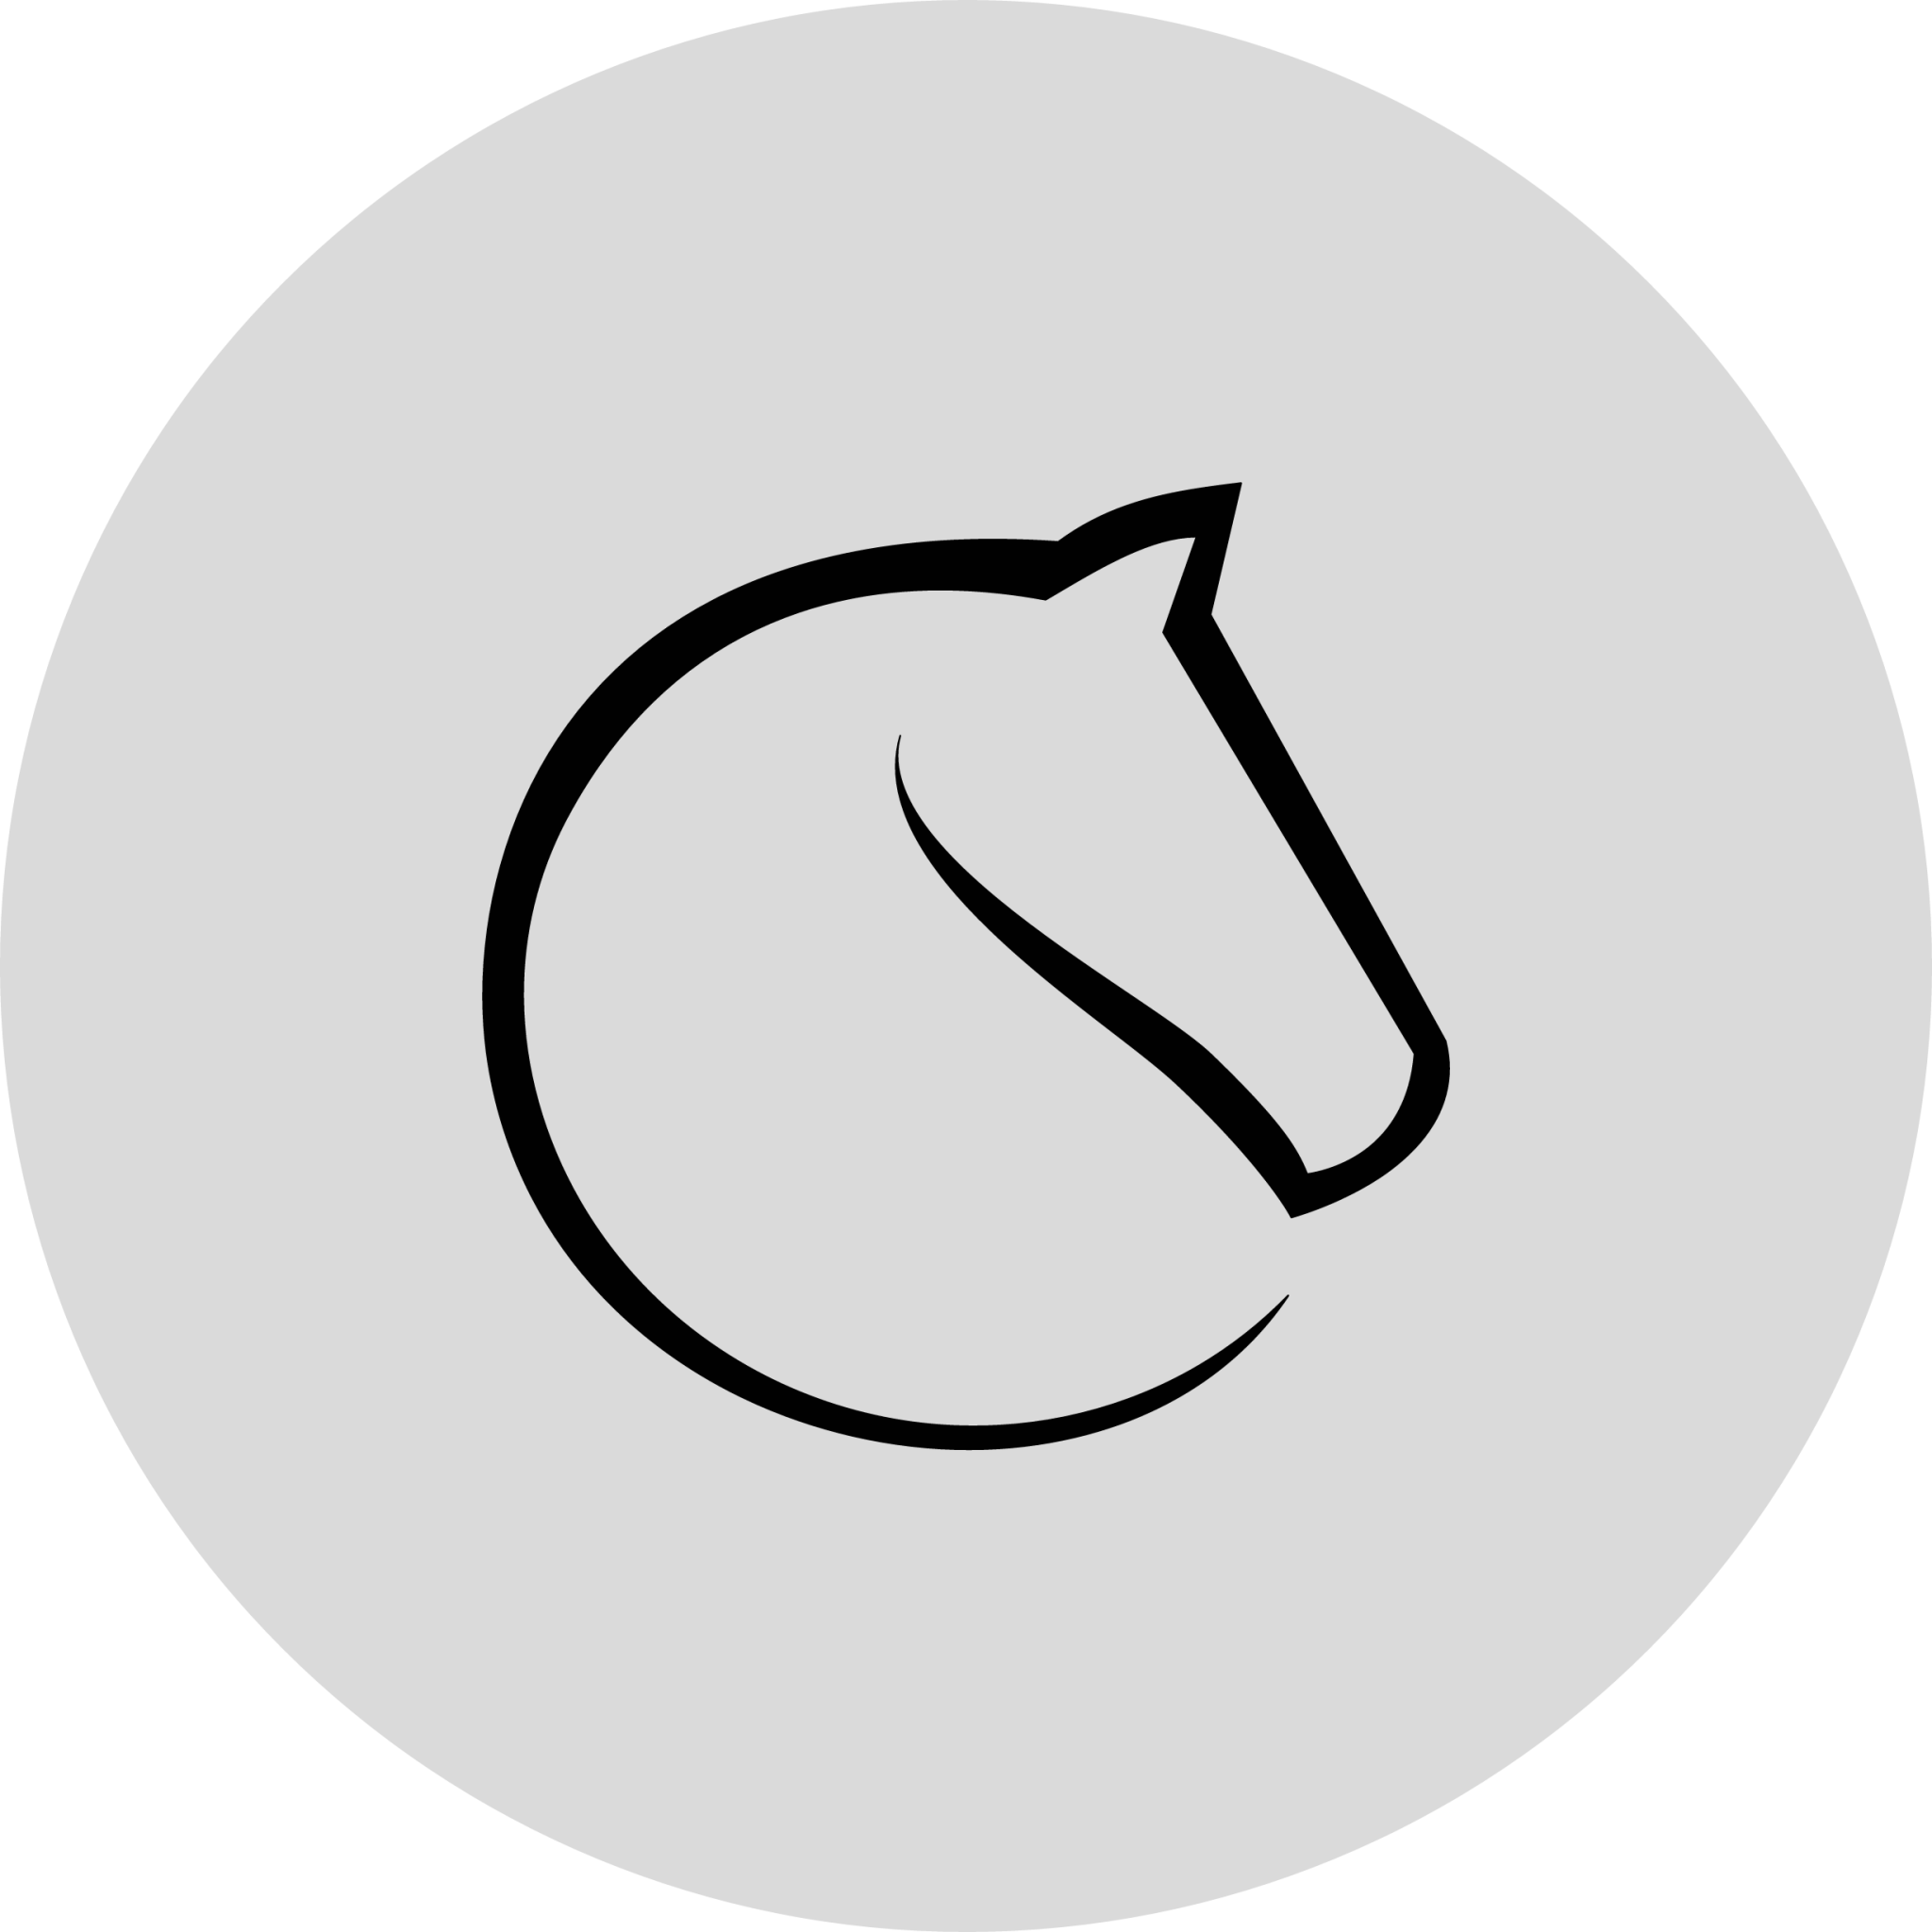 lichess Icon - Download for free – Iconduck